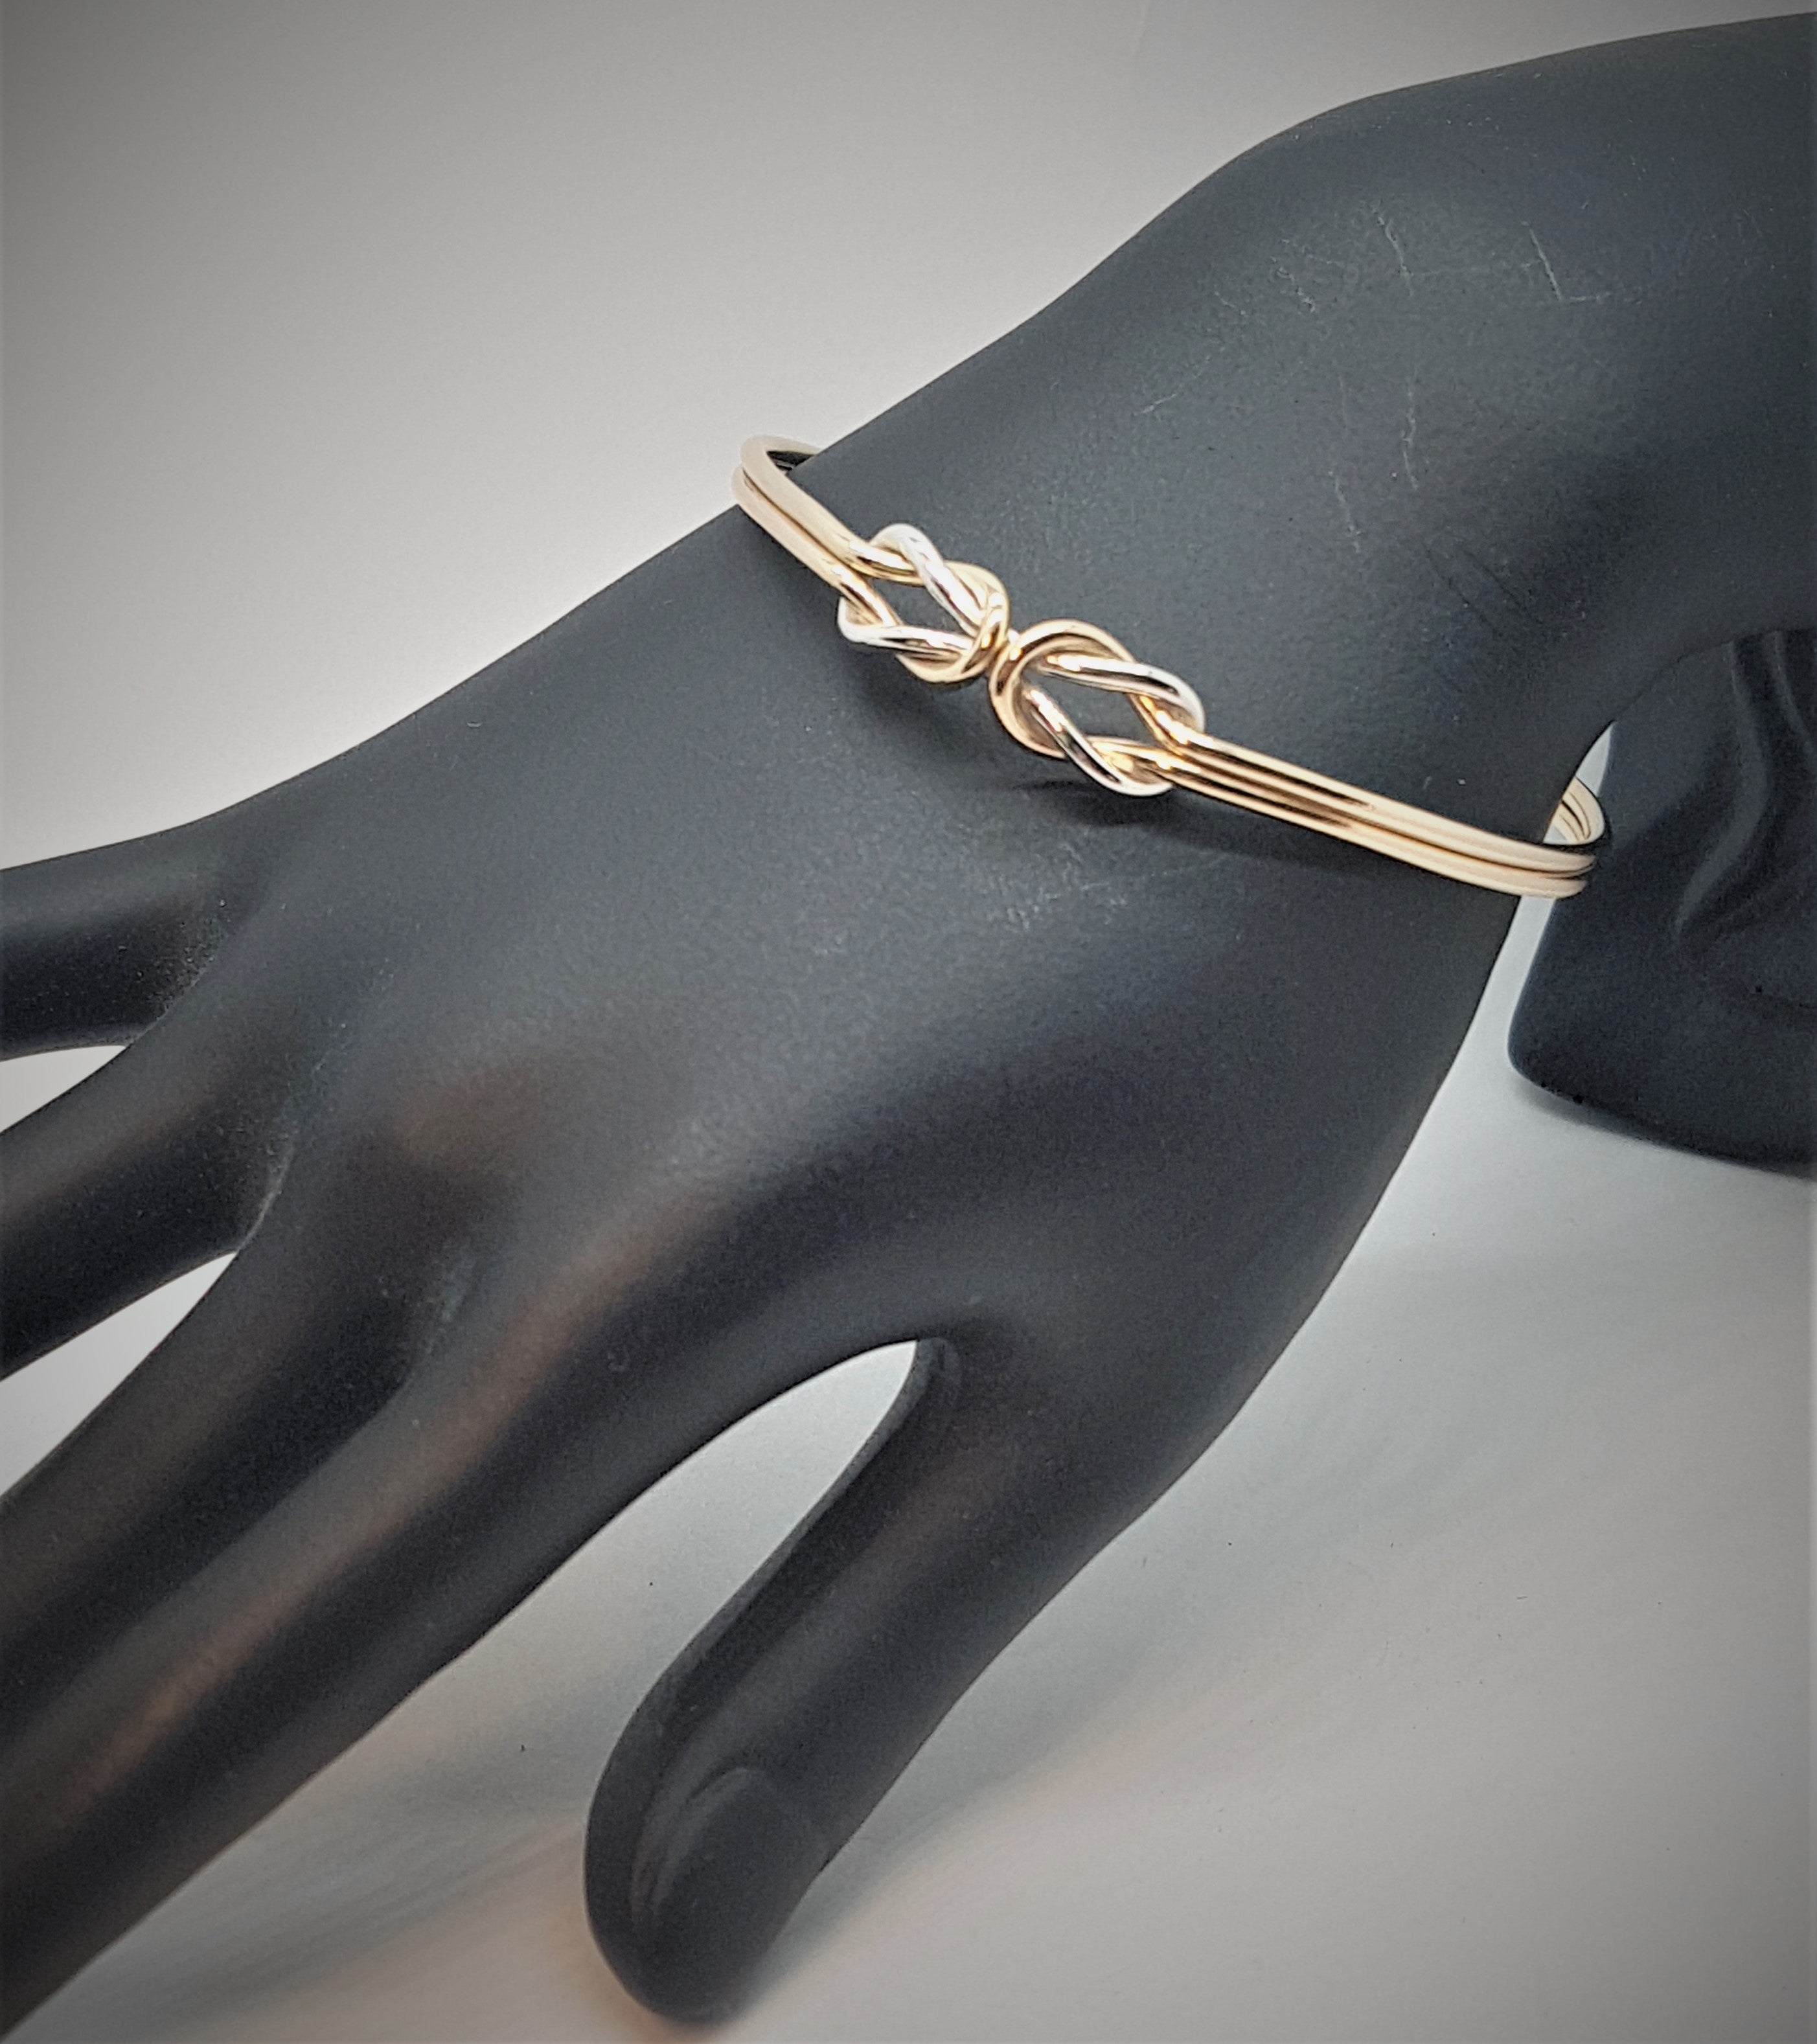 Gold and Silver Double Reef Knot Bangle